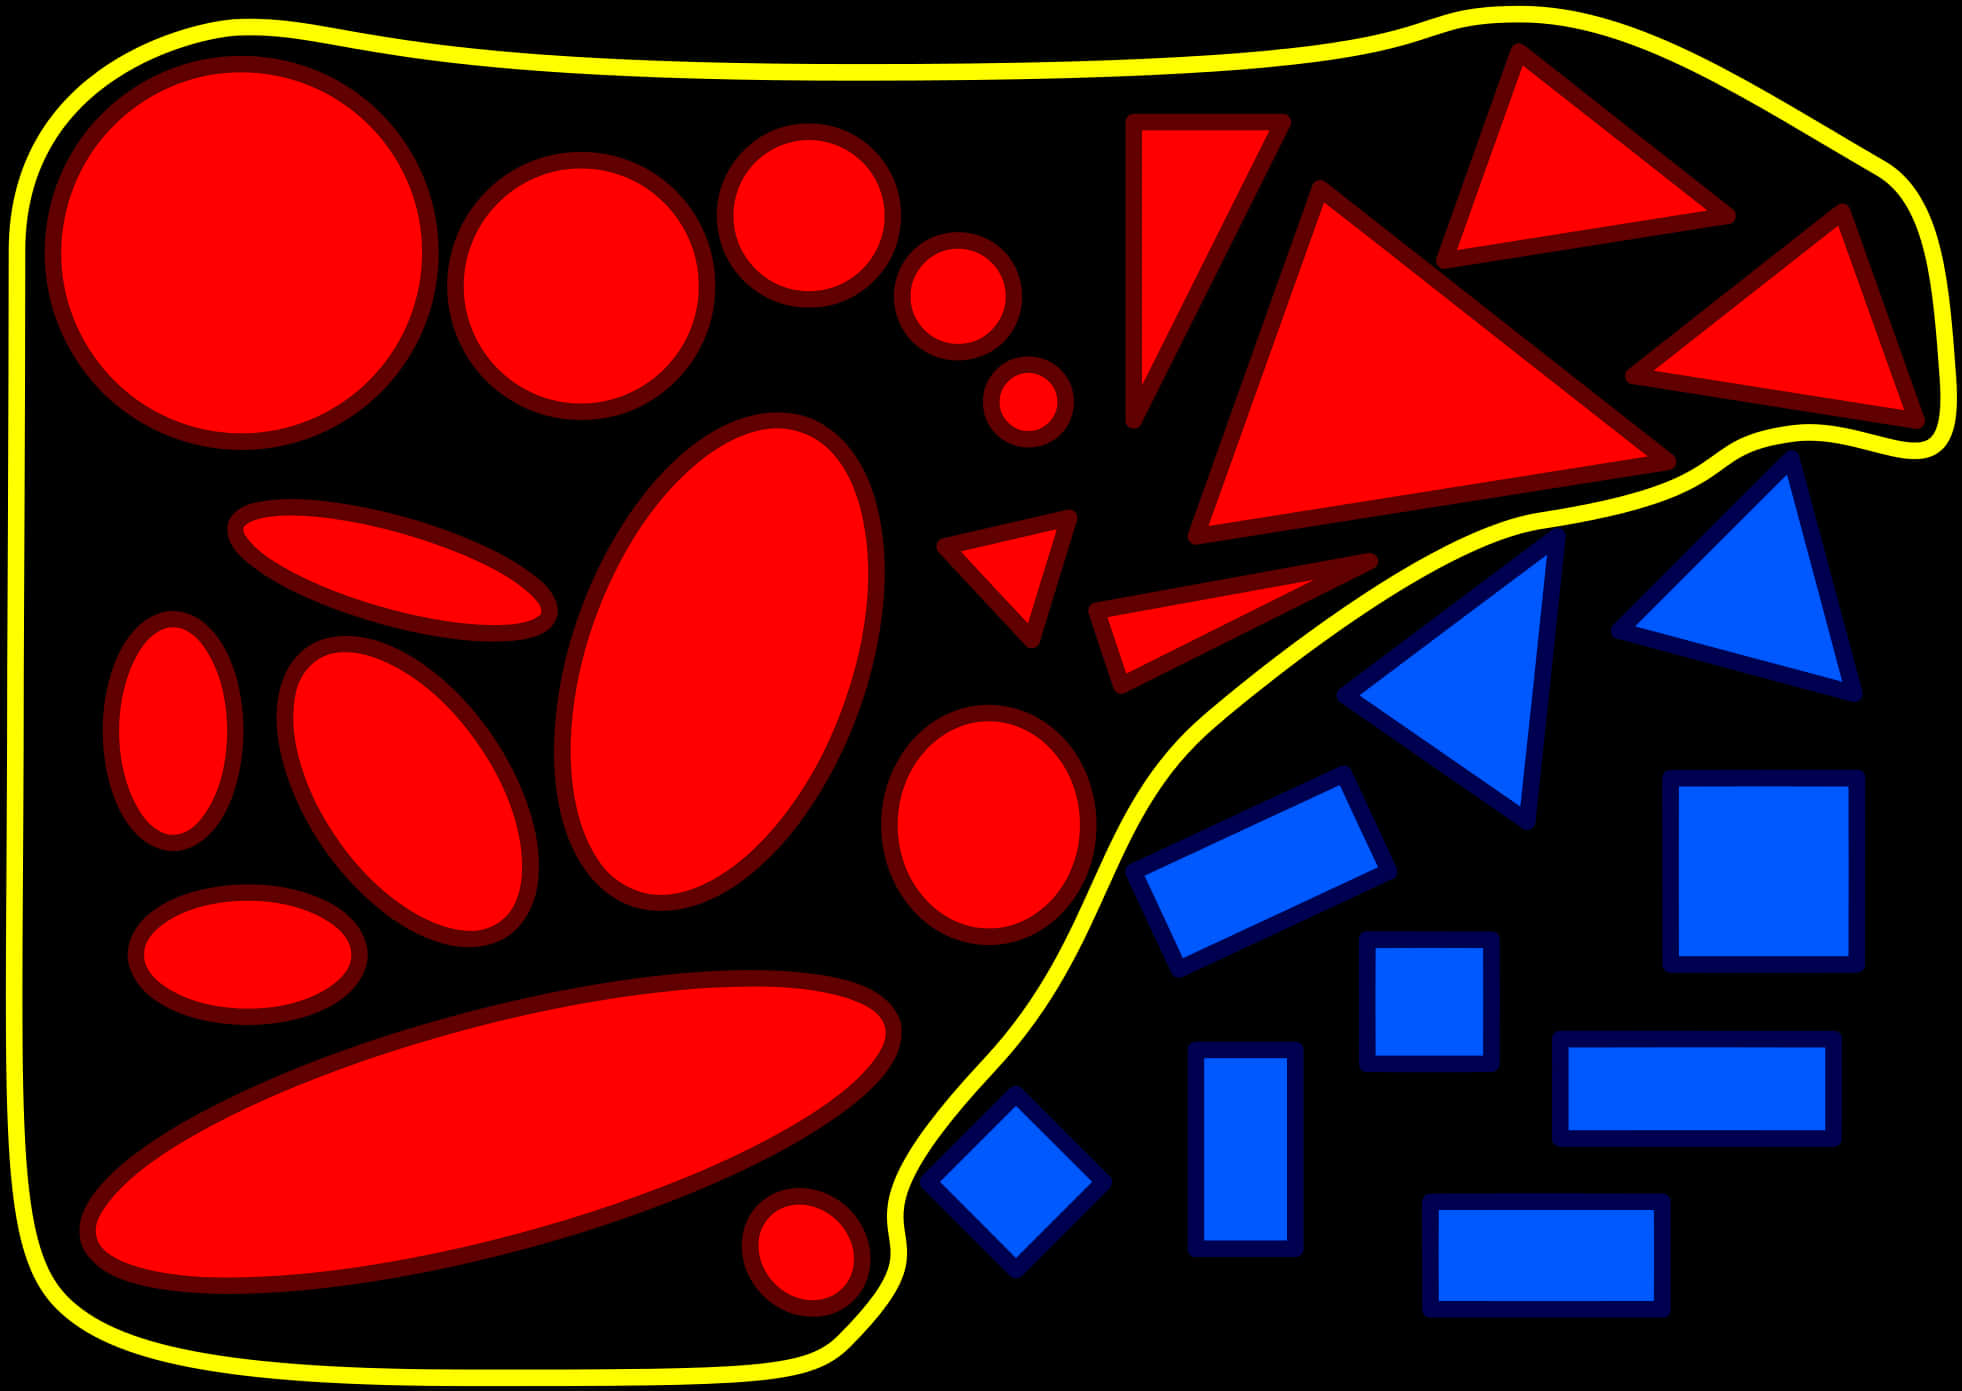 A Red And Blue Shapes On A Black Background